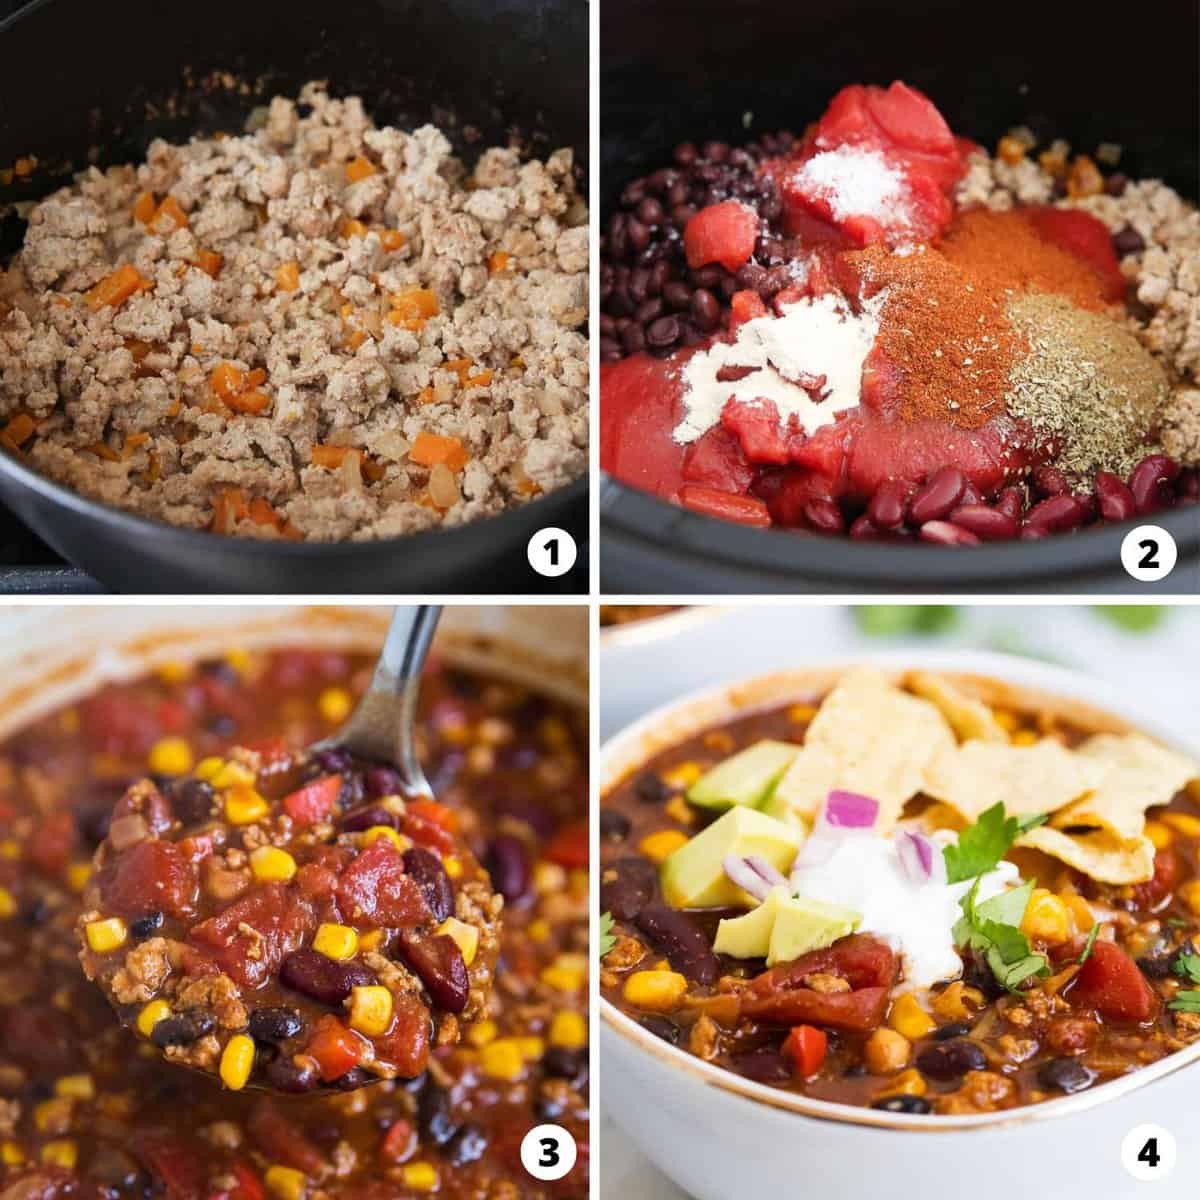 Showing how to make turkey chili in a 4 step collage.